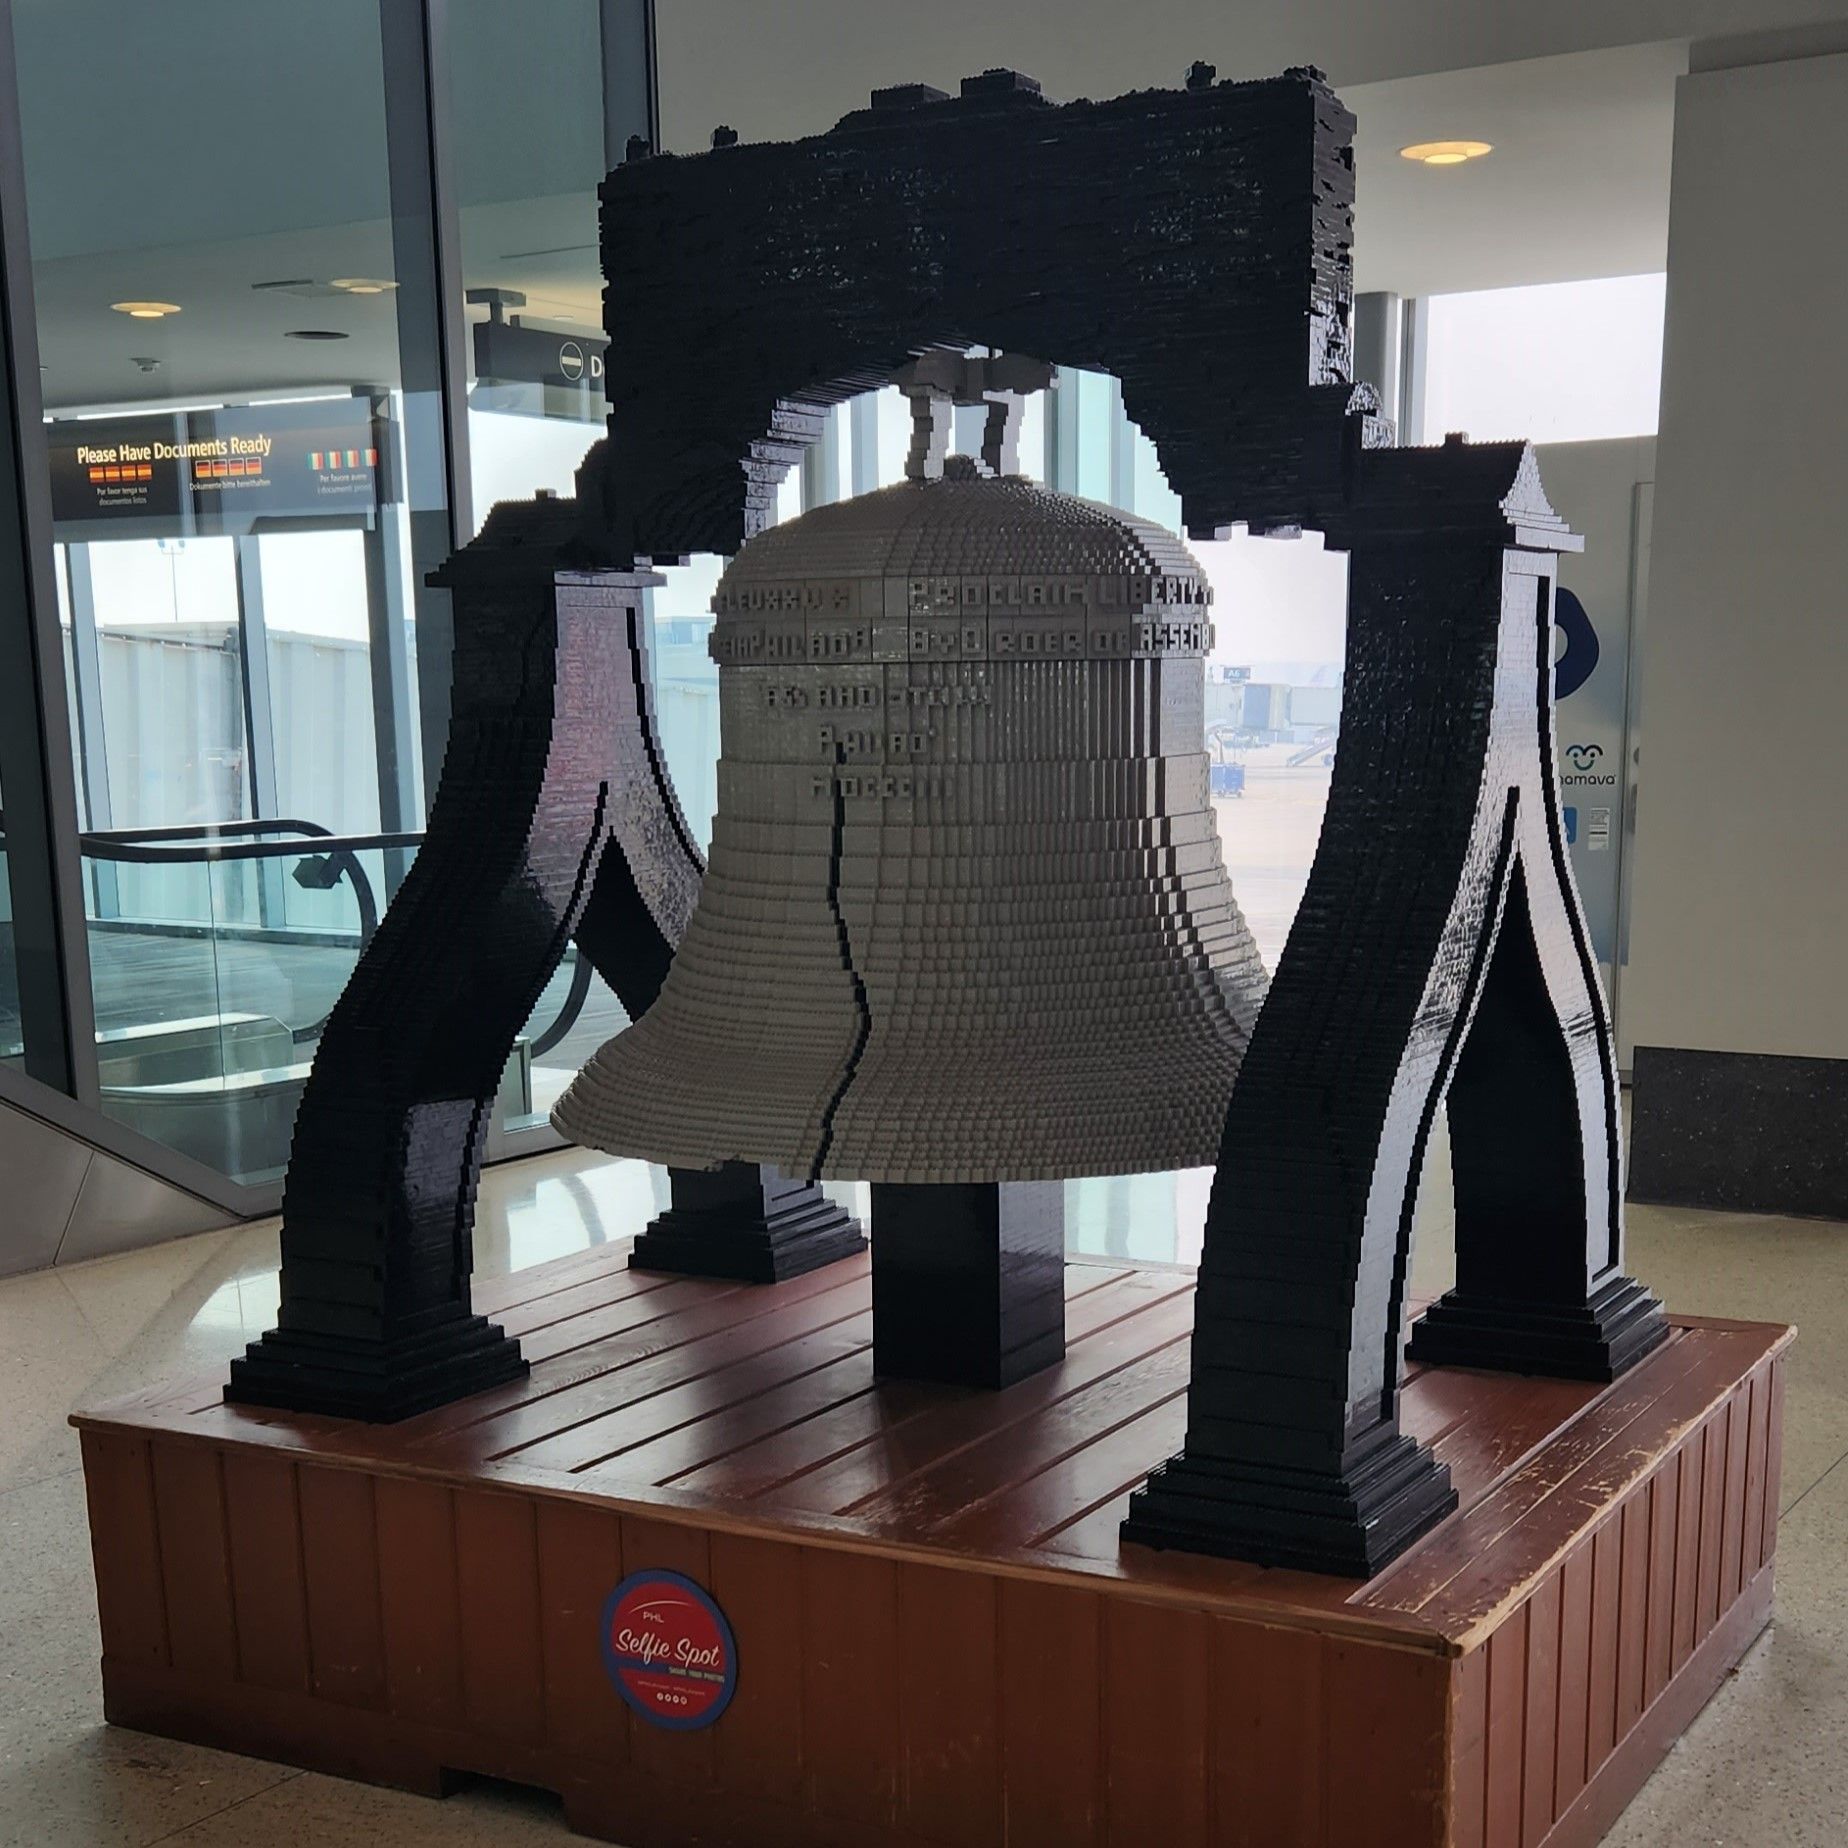 A large bell made out of Lego bricks.